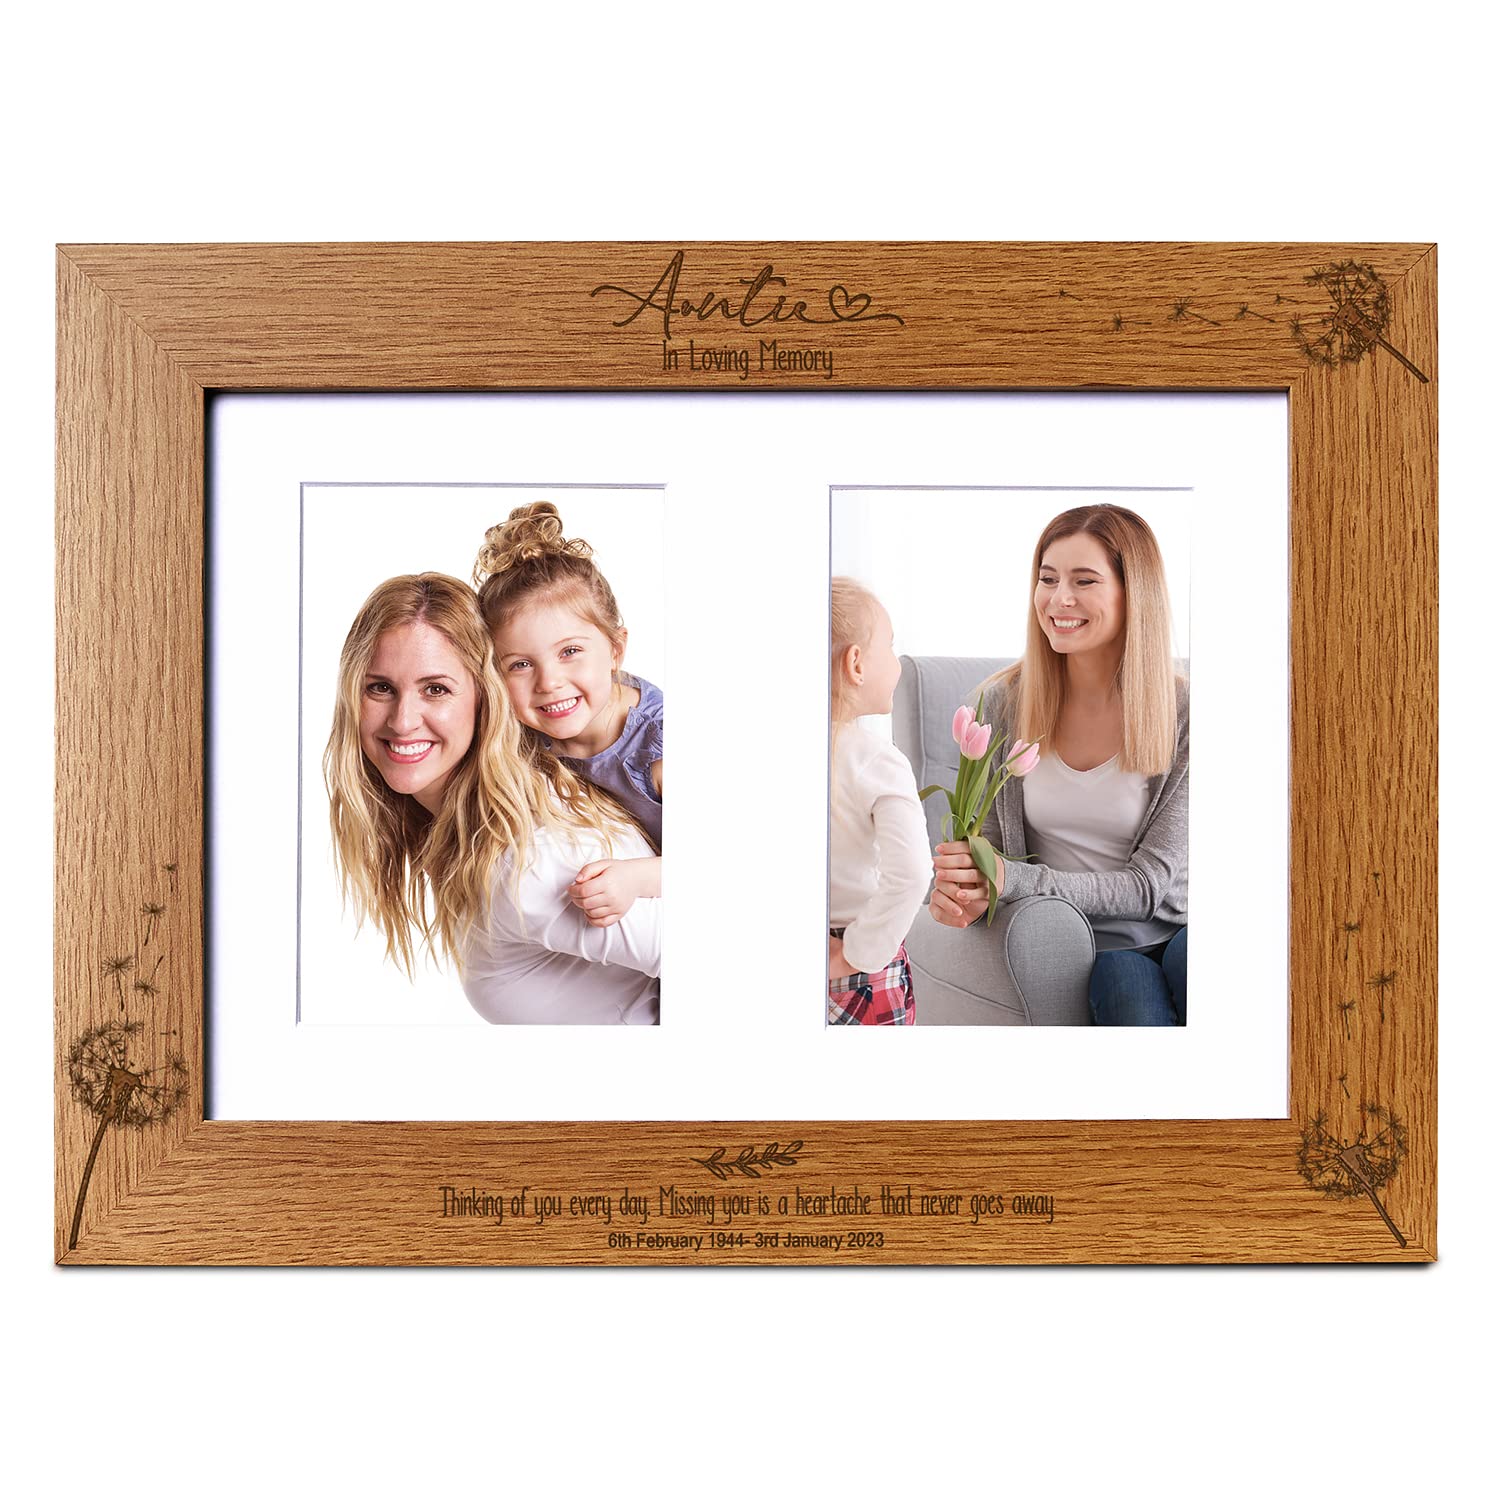 Auntie In Loving Memory Photo Frame Double 6x4 Inch Personalised